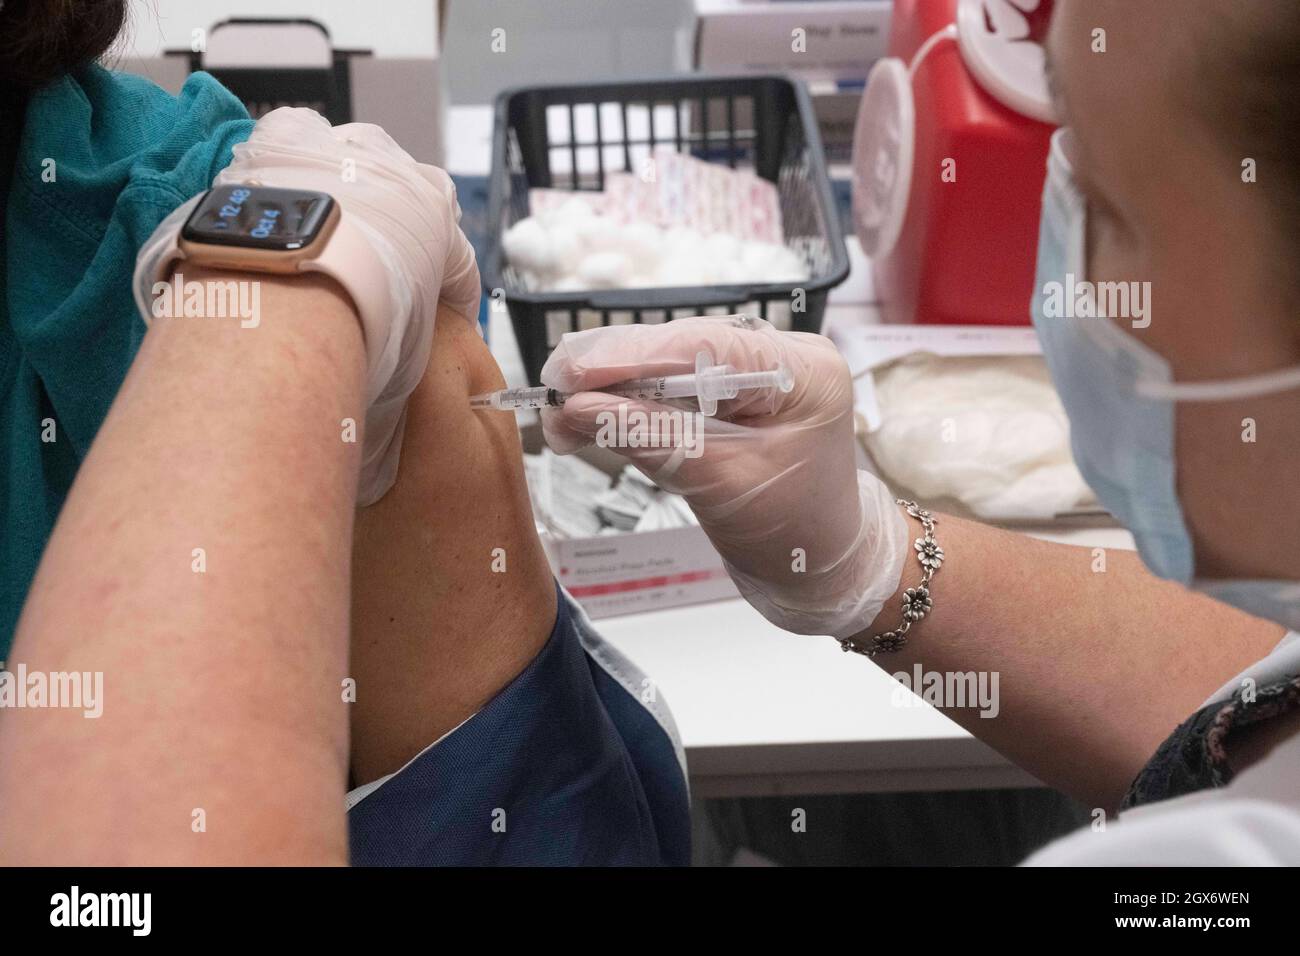 The booster shot for the Pfizer vaccine against COVID-19 is administered to a Texas resident over 65 at a pharmacy clinic in west Austin on October 4, 2021. Doctors are encouraging the vaccine boosters after 6 months of the original shots. Credit: Bob Daemmrich/Alamy Live News Stock Photo